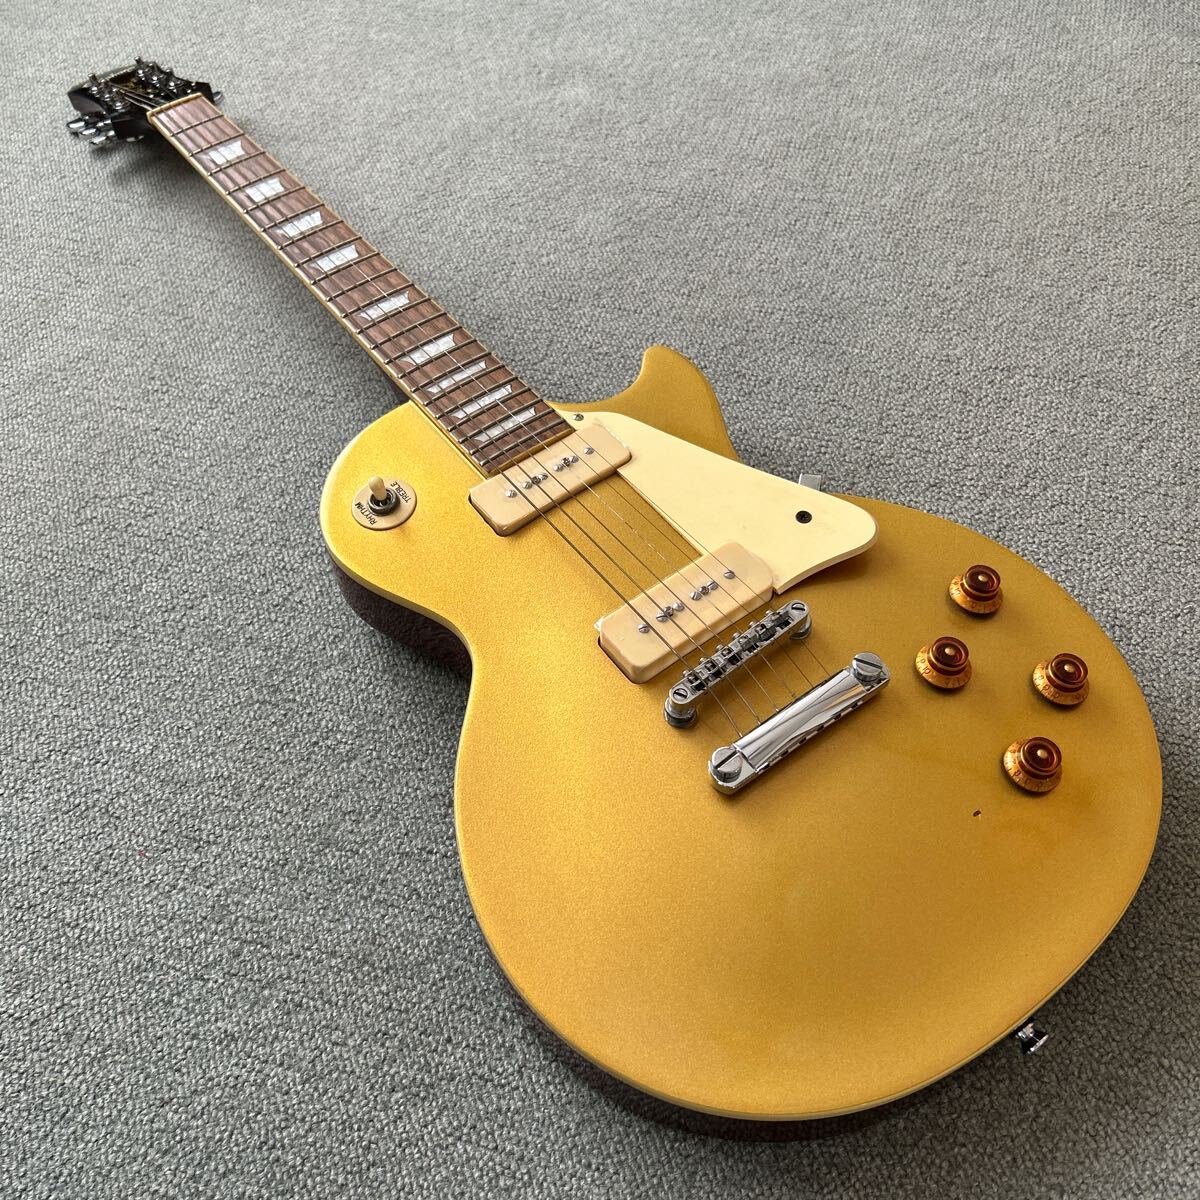 epiphone by Gibson Les Paul standard 1956 GOLD TOP エピフォン　ギブソン　レスポール　スタンダード　ジャンク扱い lespaul 56 _画像1